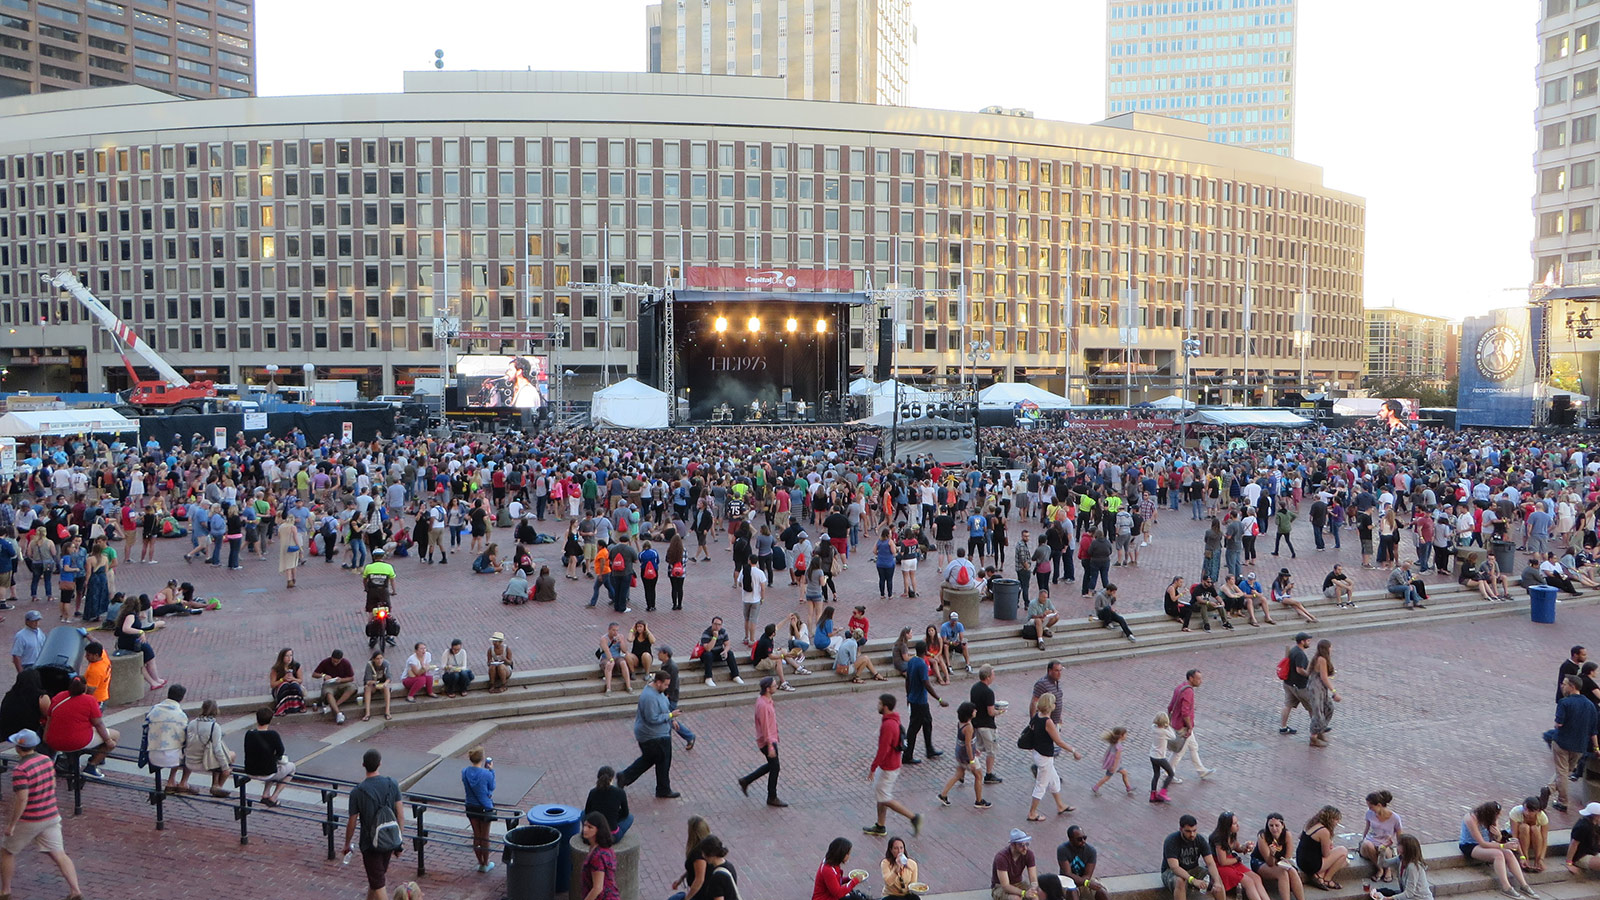 Meyer Sound LYON at Boston Calling Festival: A System that Can 